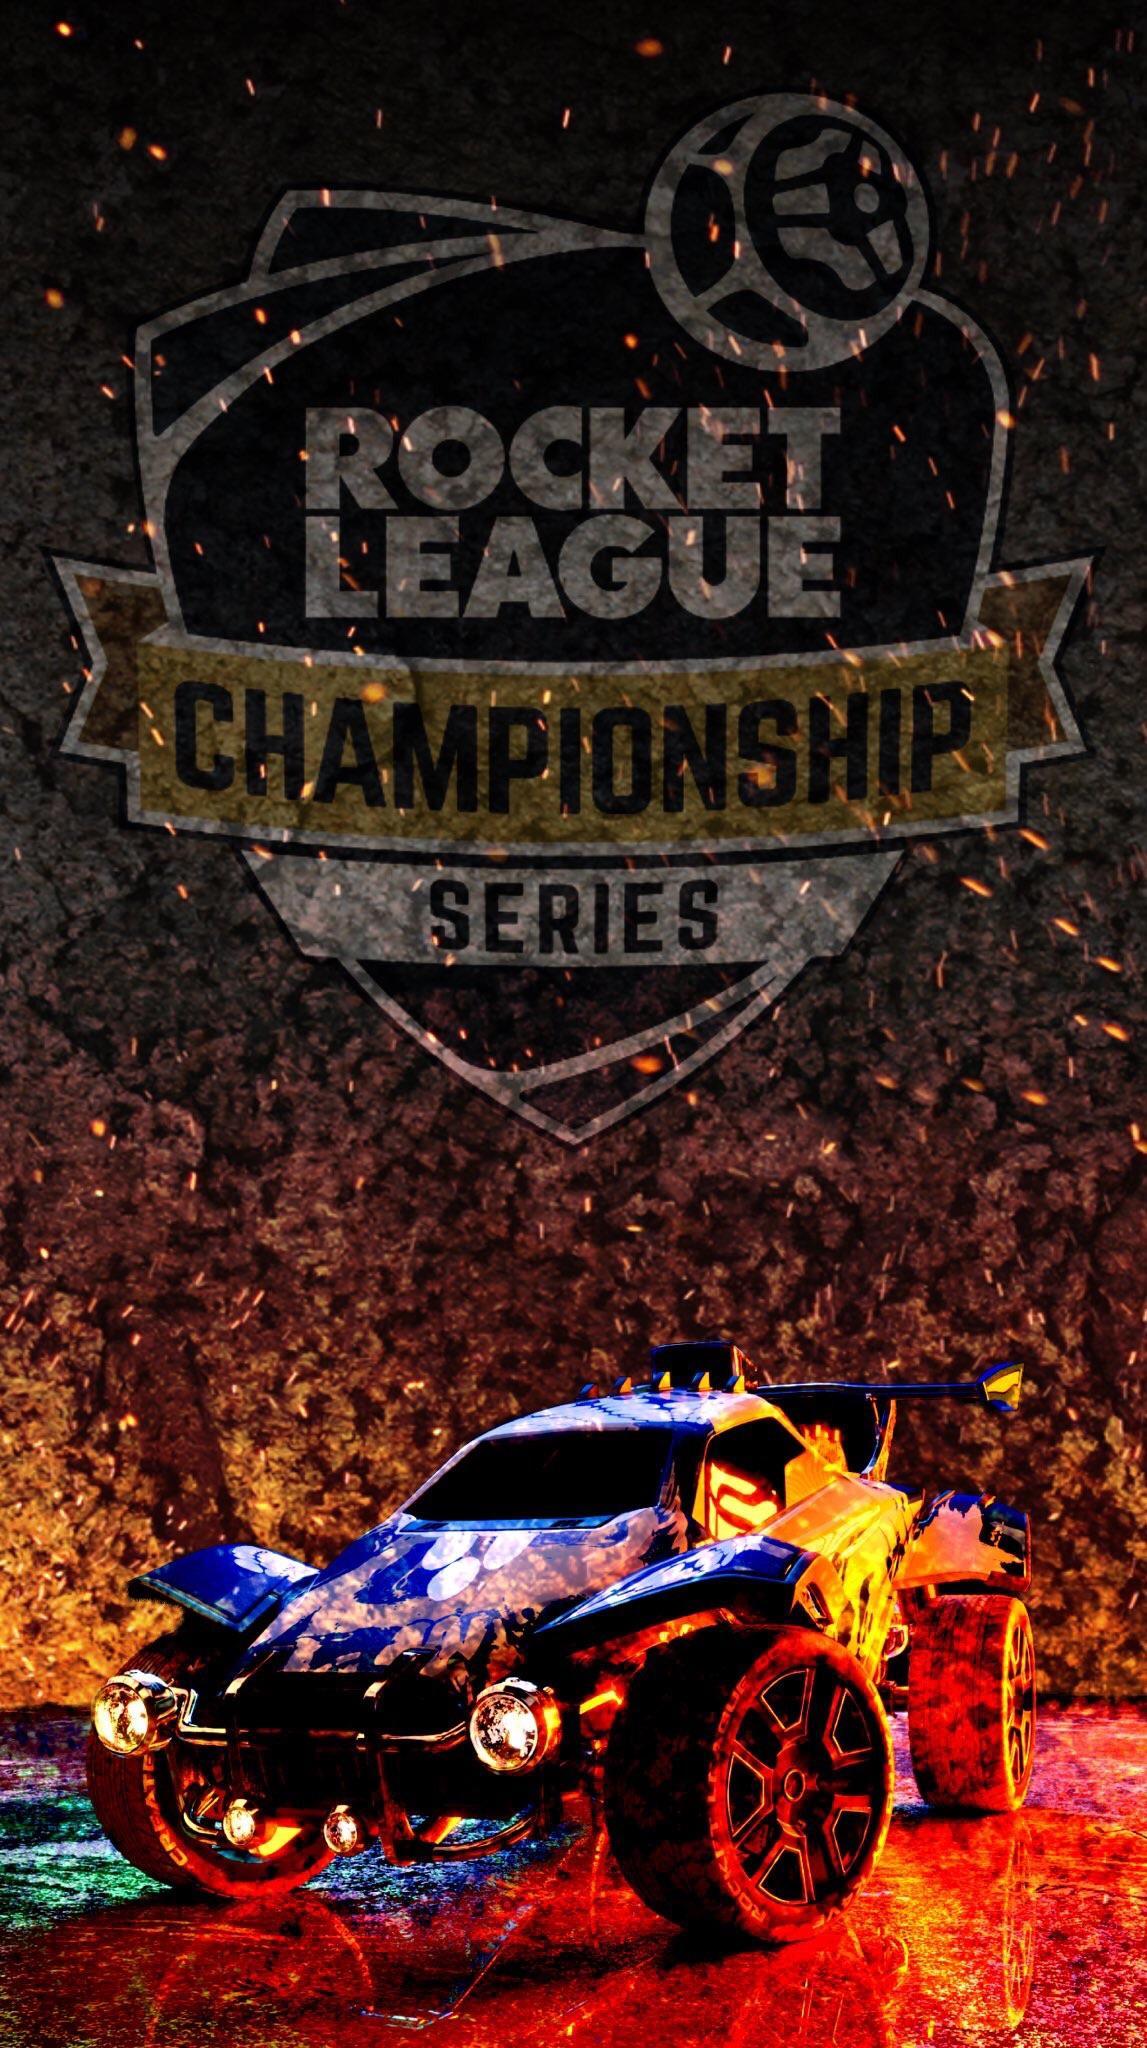 Some Rocket League mobile wallpaper for RLCS!